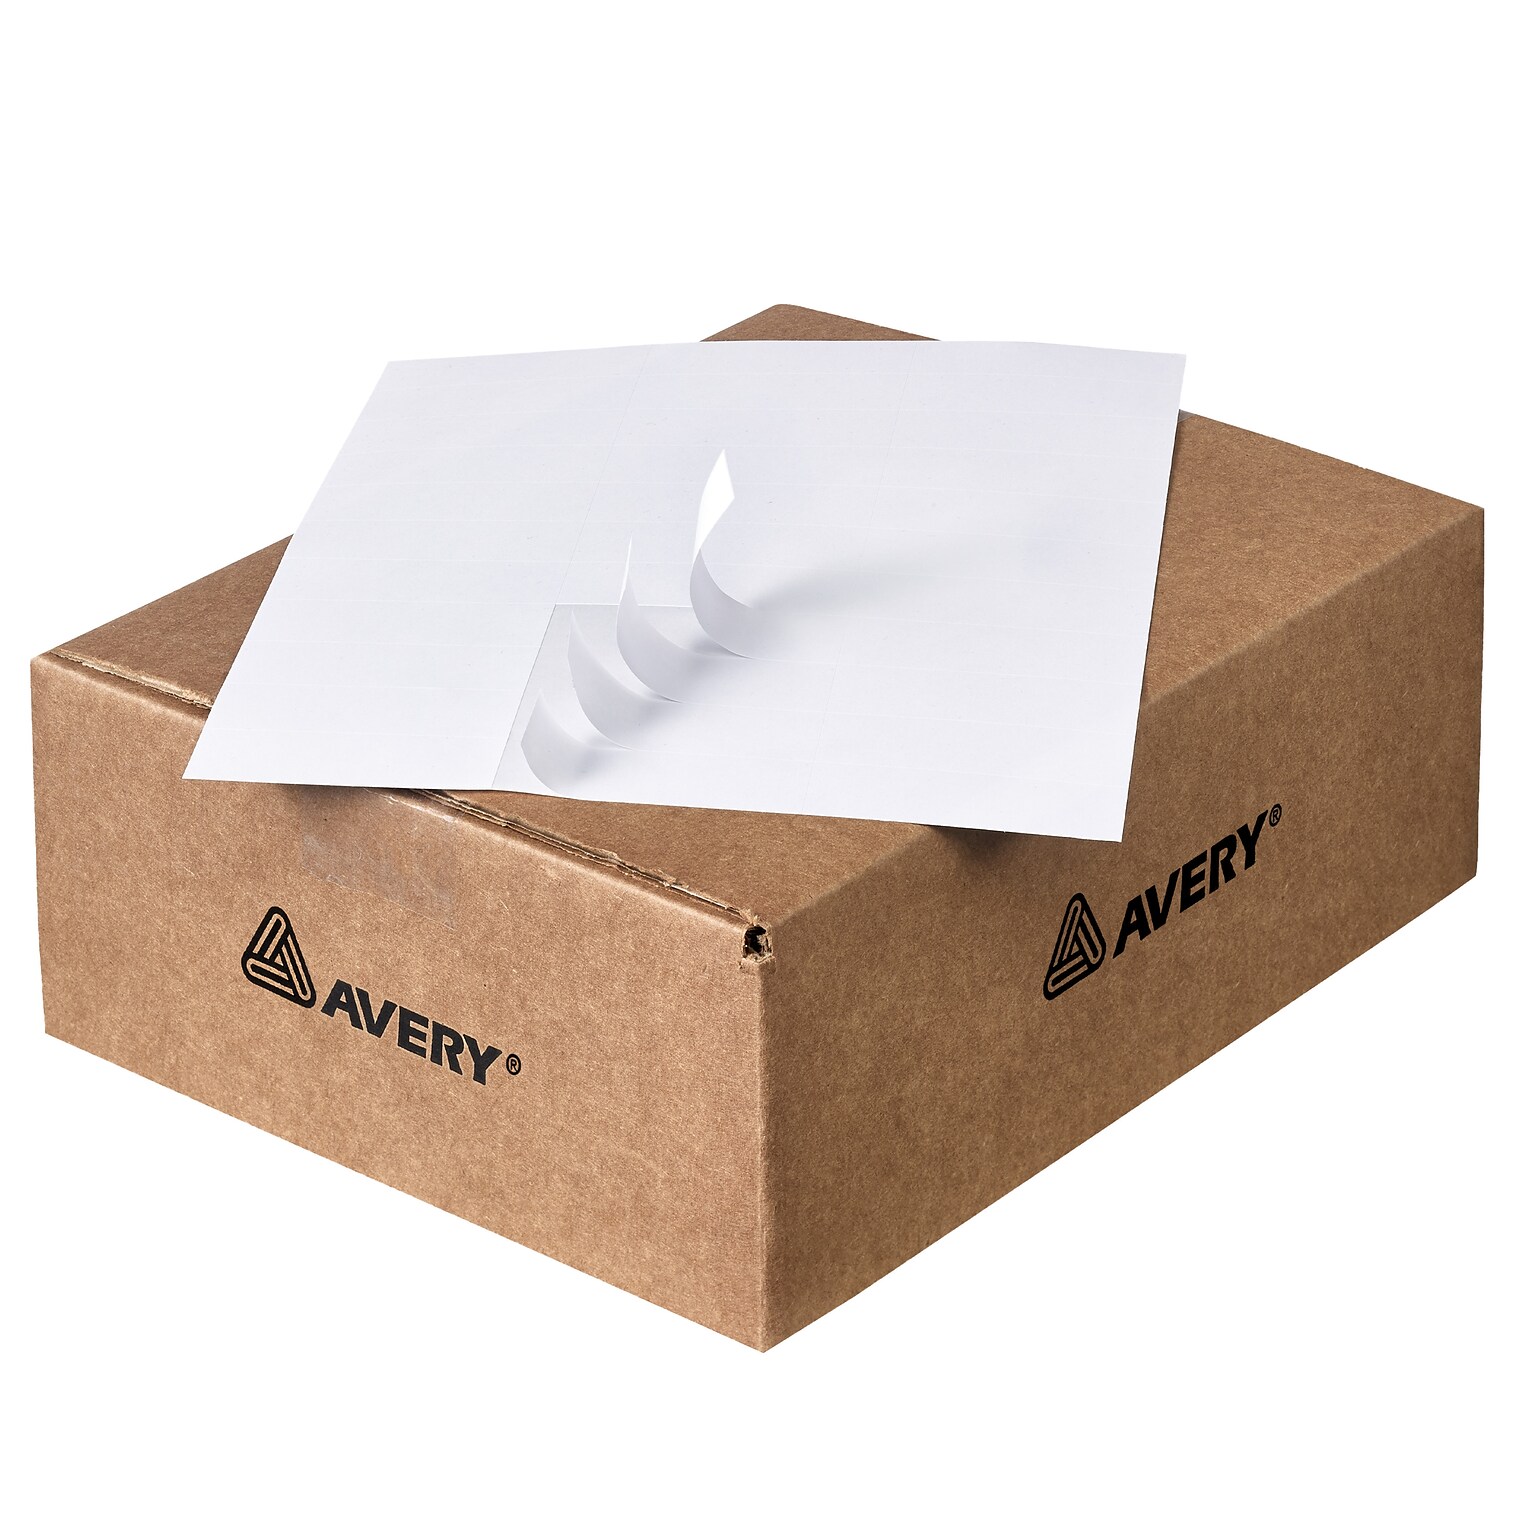 Avery Address Labels for Copiers, 1 x 2-13/16, White, 33 Labels/Sheet, 500 Sheets/Box (5334)